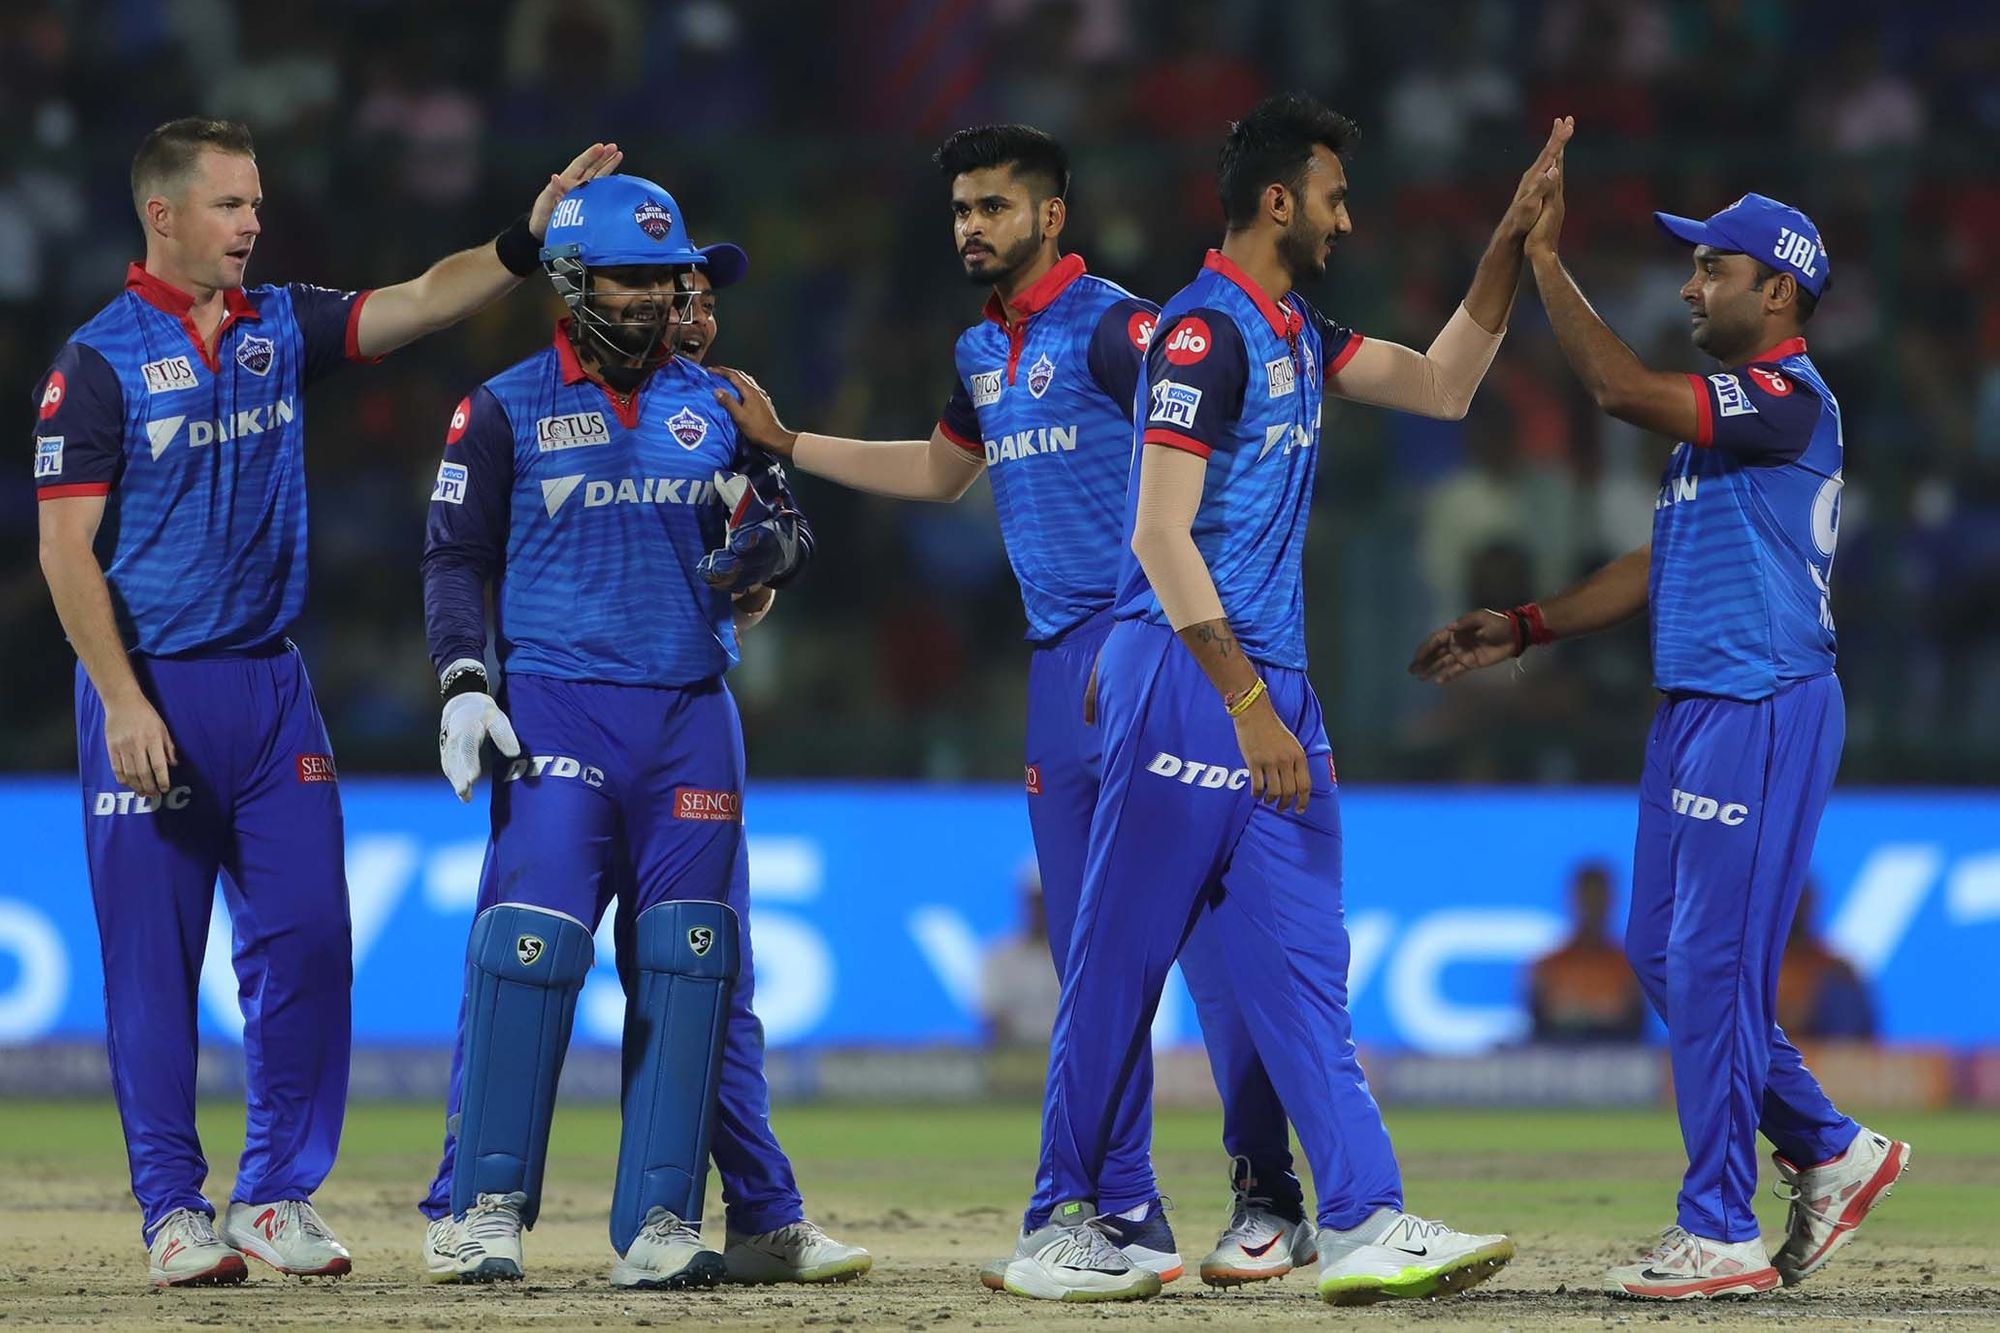 IPL 2020 | Delhi Capitals have a balanced team to do well in UAE, reckons Shikhar Dhawan